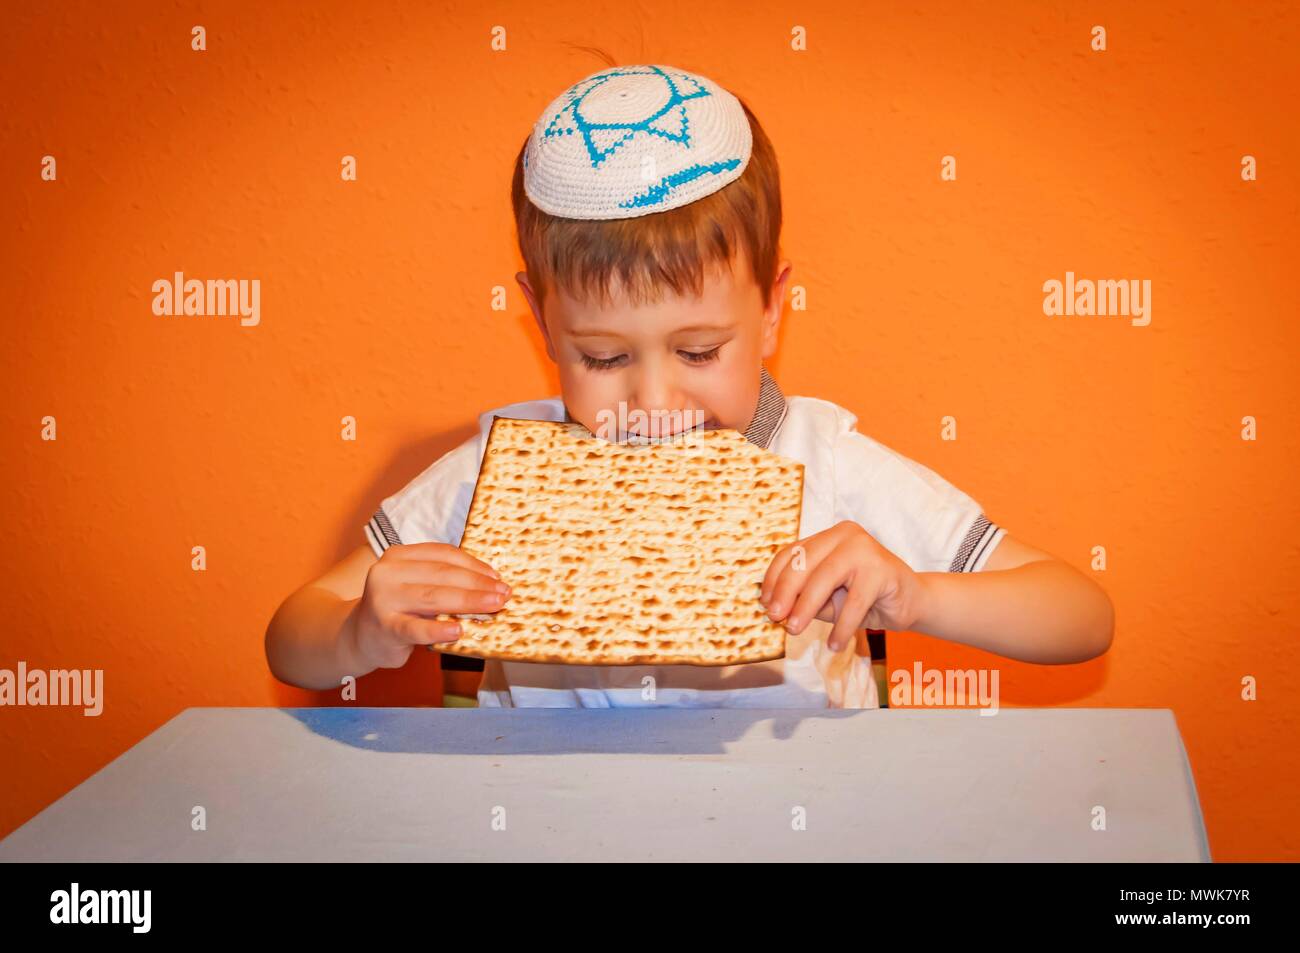 Happy little Jewish child with a kippah on his head eating matzo bread during the Jewish holiday of Pessach. Passover illustration. Stock Photo